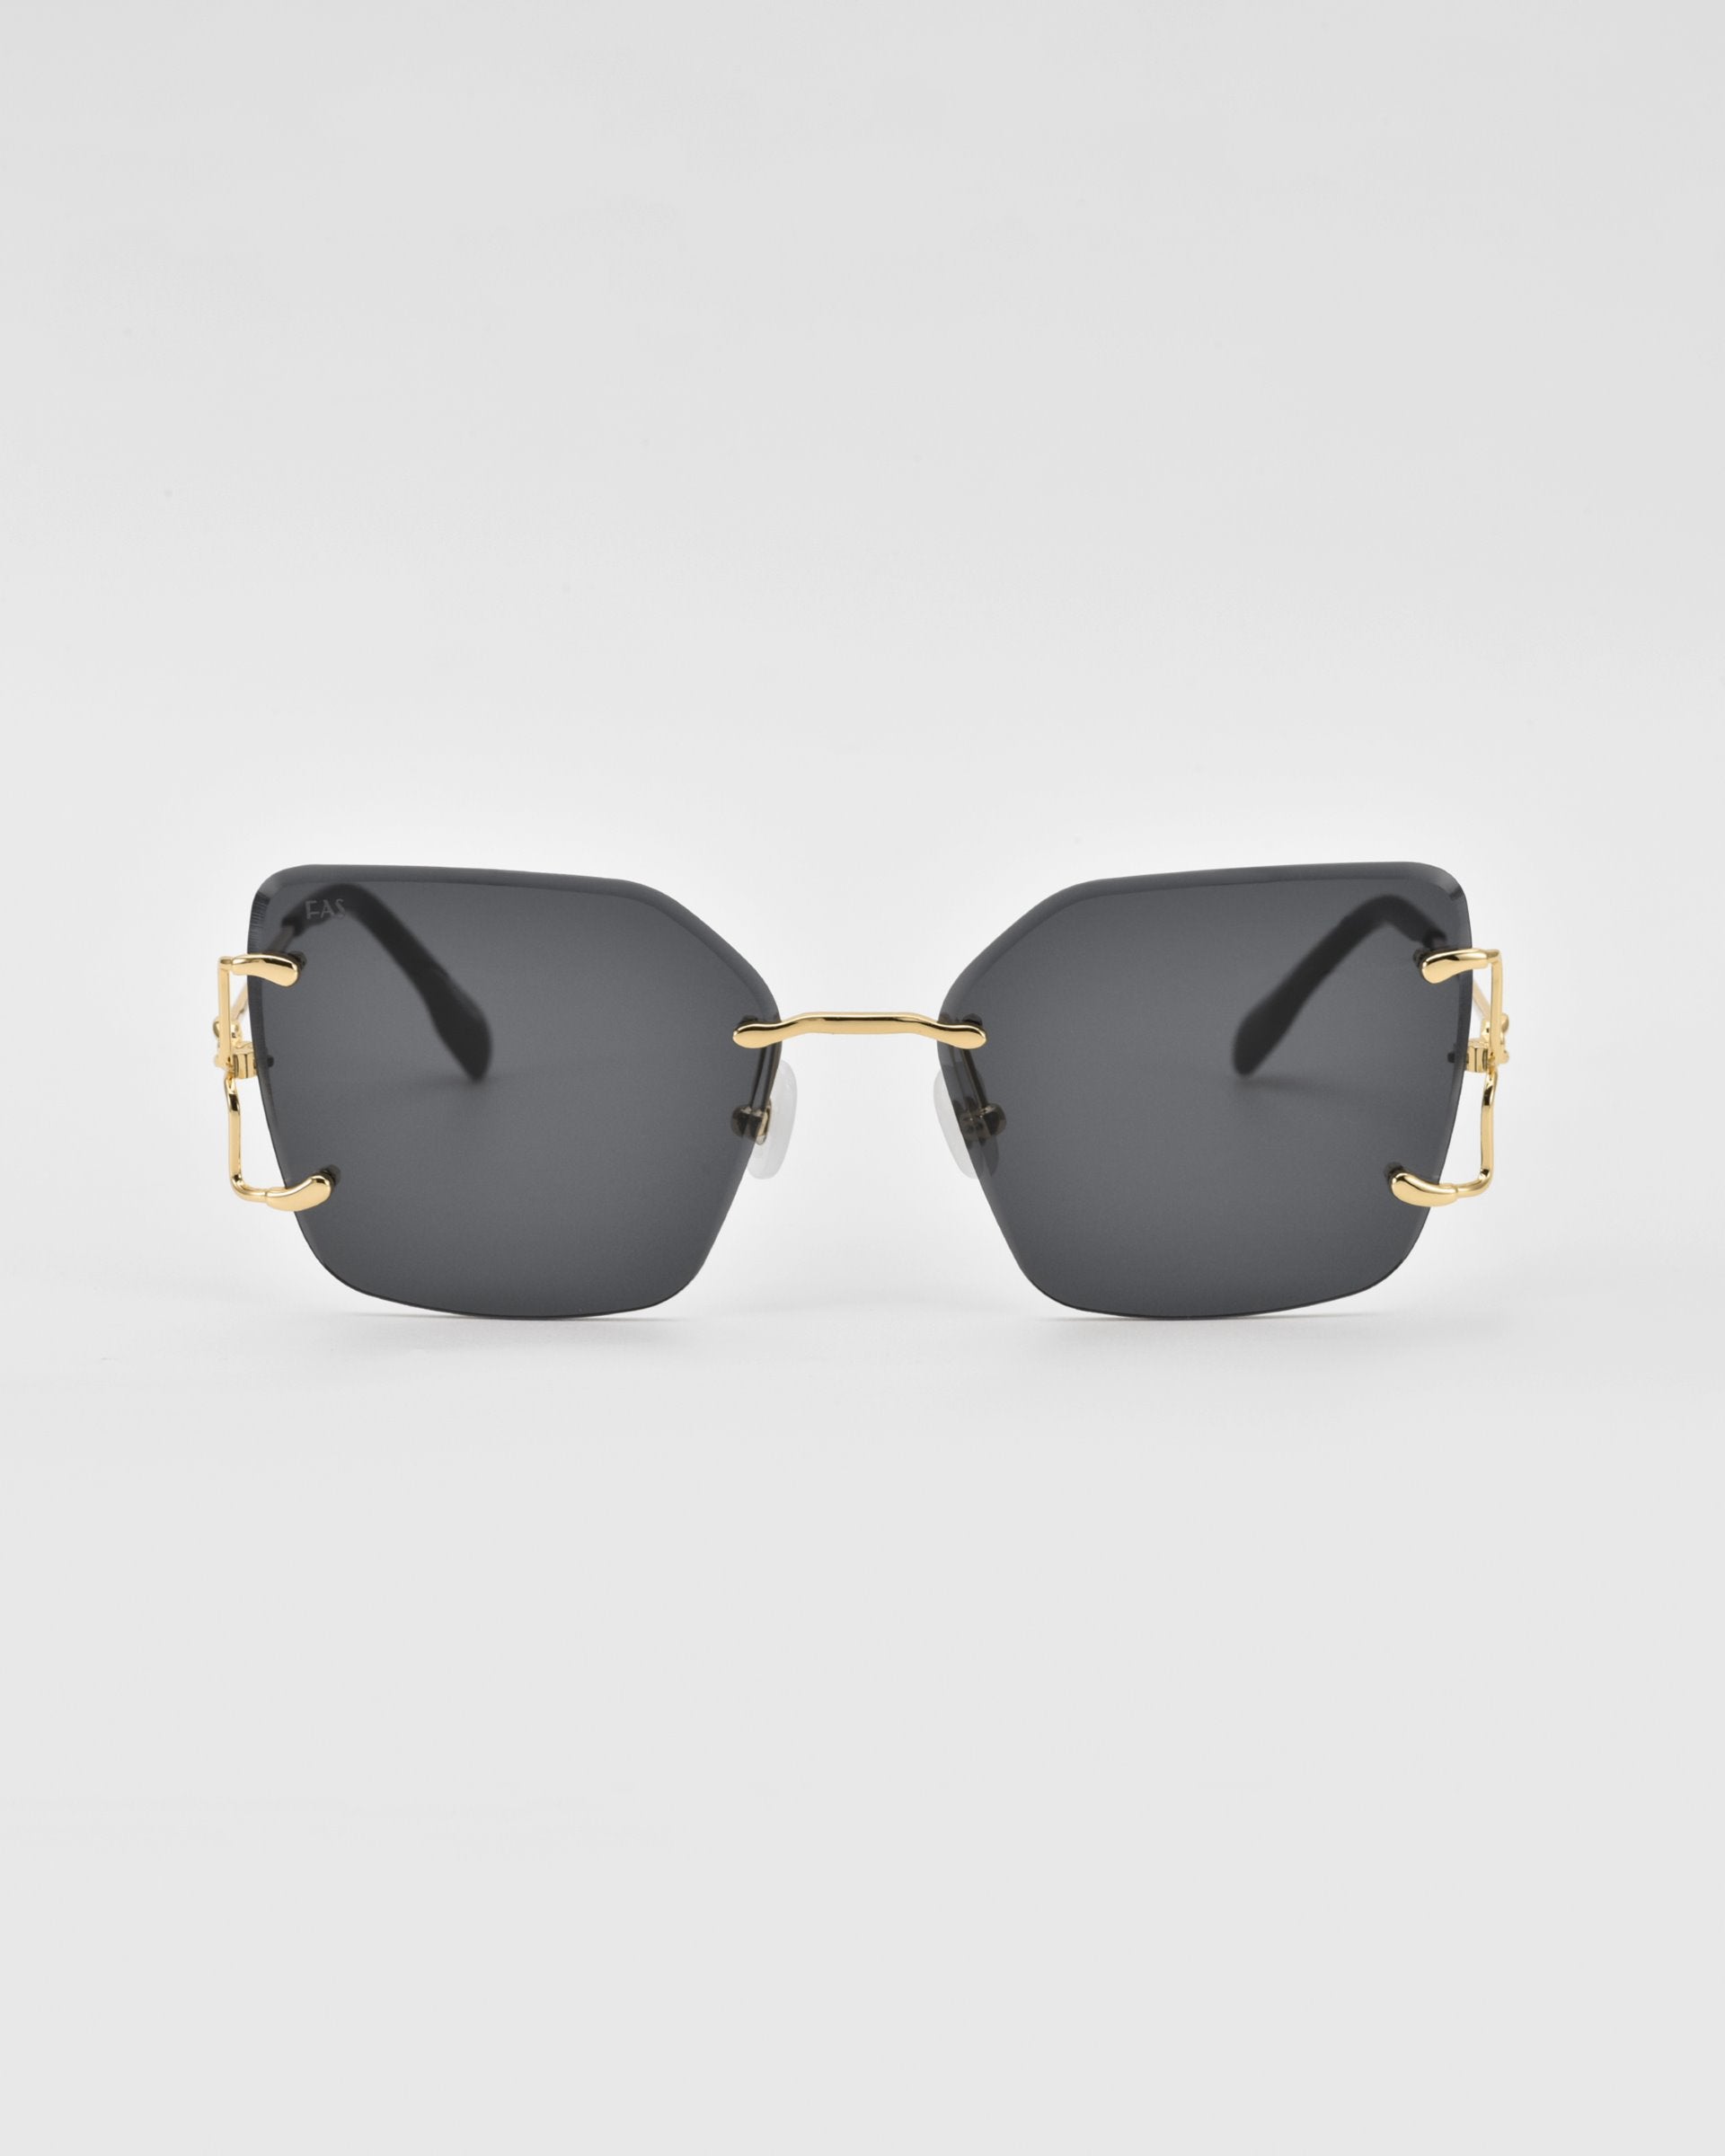 A pair of modern, oversized square lenses sunglasses with dark tinted lenses and gold-colored metal accents on the temples. The For Art&#39;s Sake® Starlit sunglasses feature jade-stone nosepads, and the minimalistic frame lacks a visible border around the lenses, creating a sleek and stylish design against a plain white background.